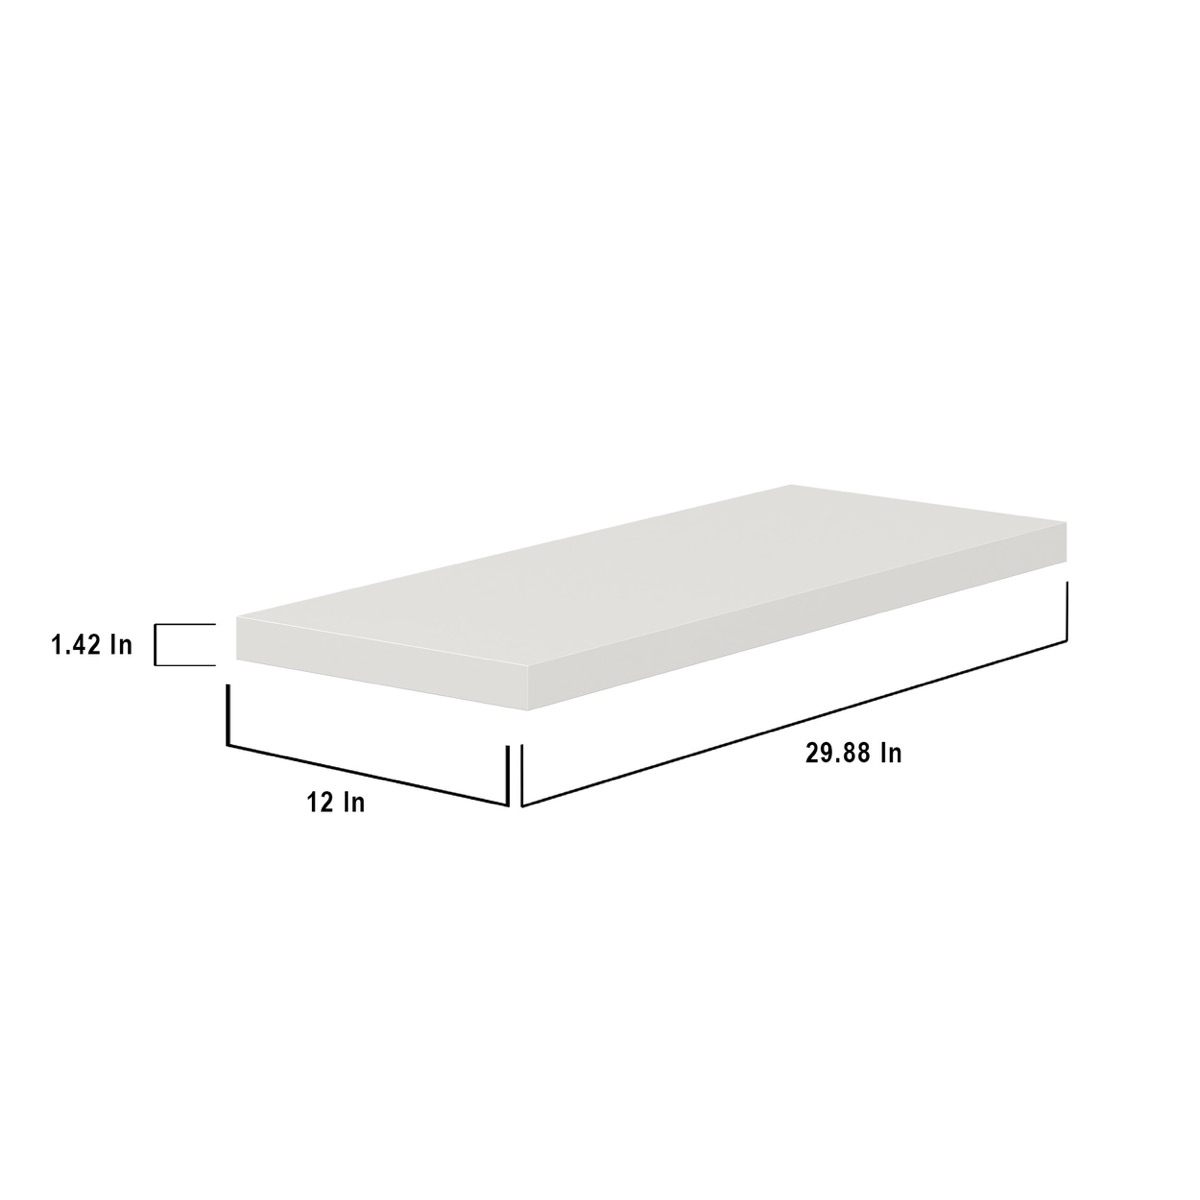 30 in. W X 1.5 in. H X 12 in. D  Light Gray Floating Shelf with Mounting Bracket